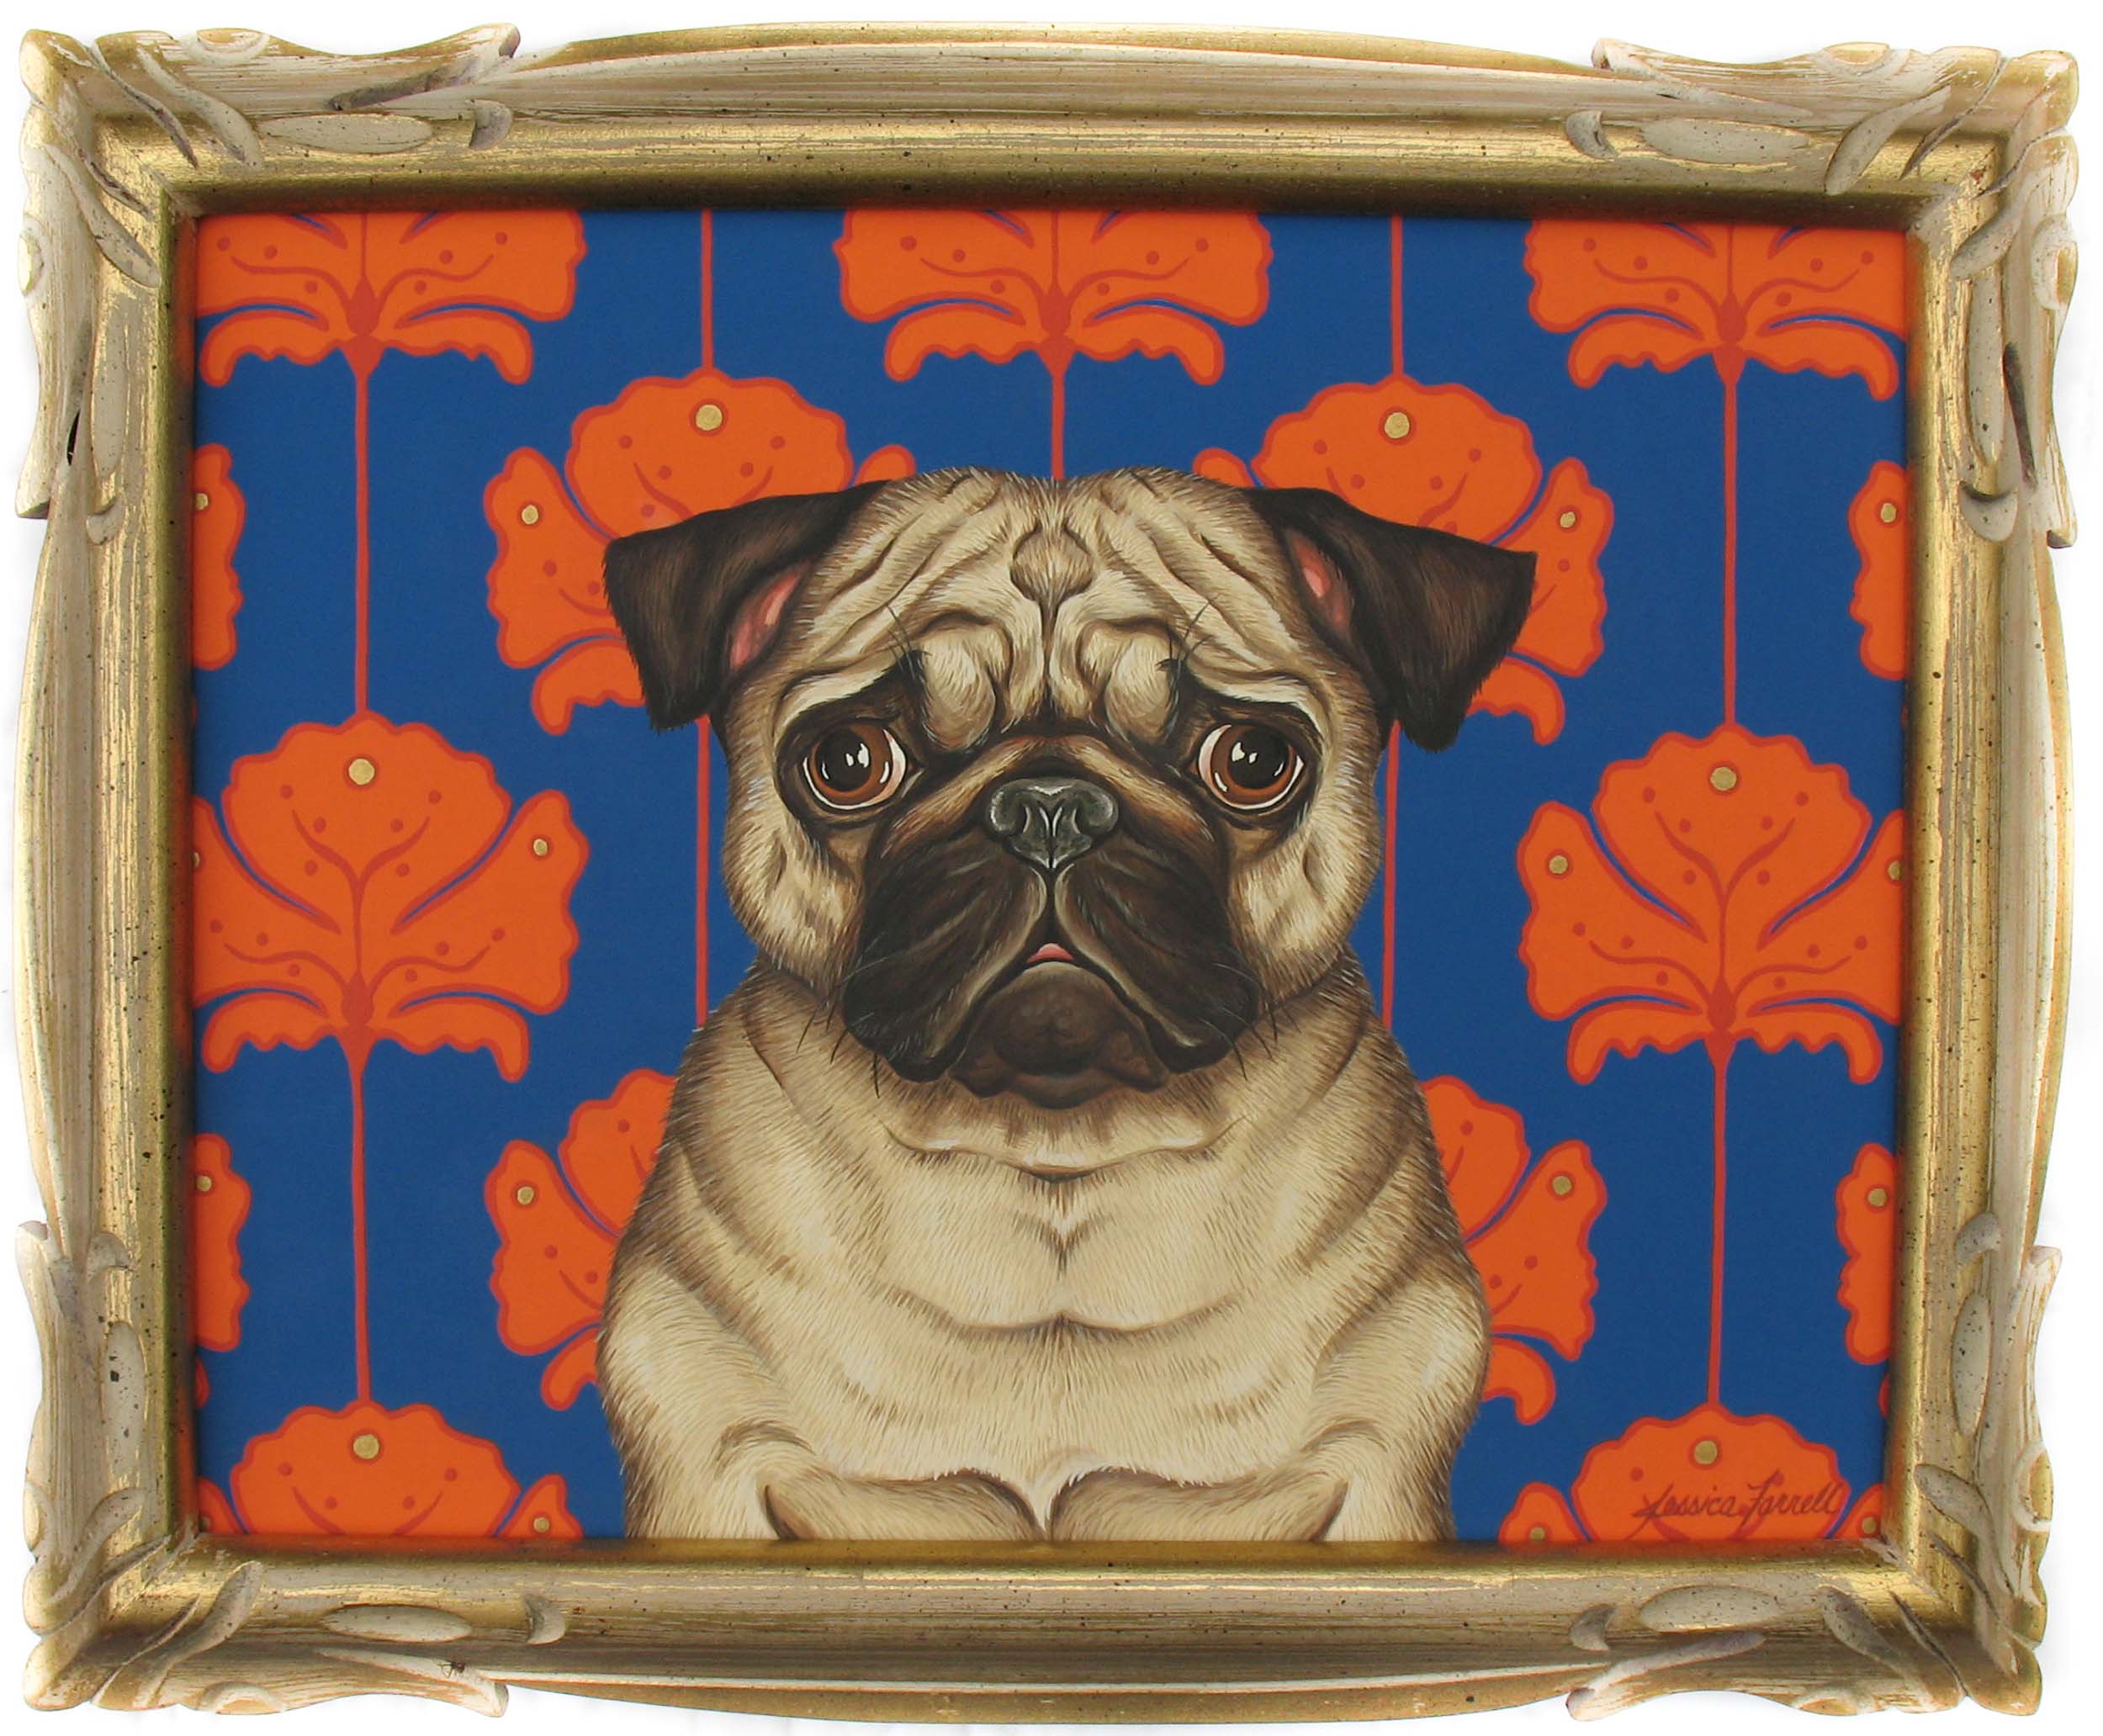   Pug , Acrylic on wood with vintage frame, 16 x 20 inches (framed)  (private collection) 